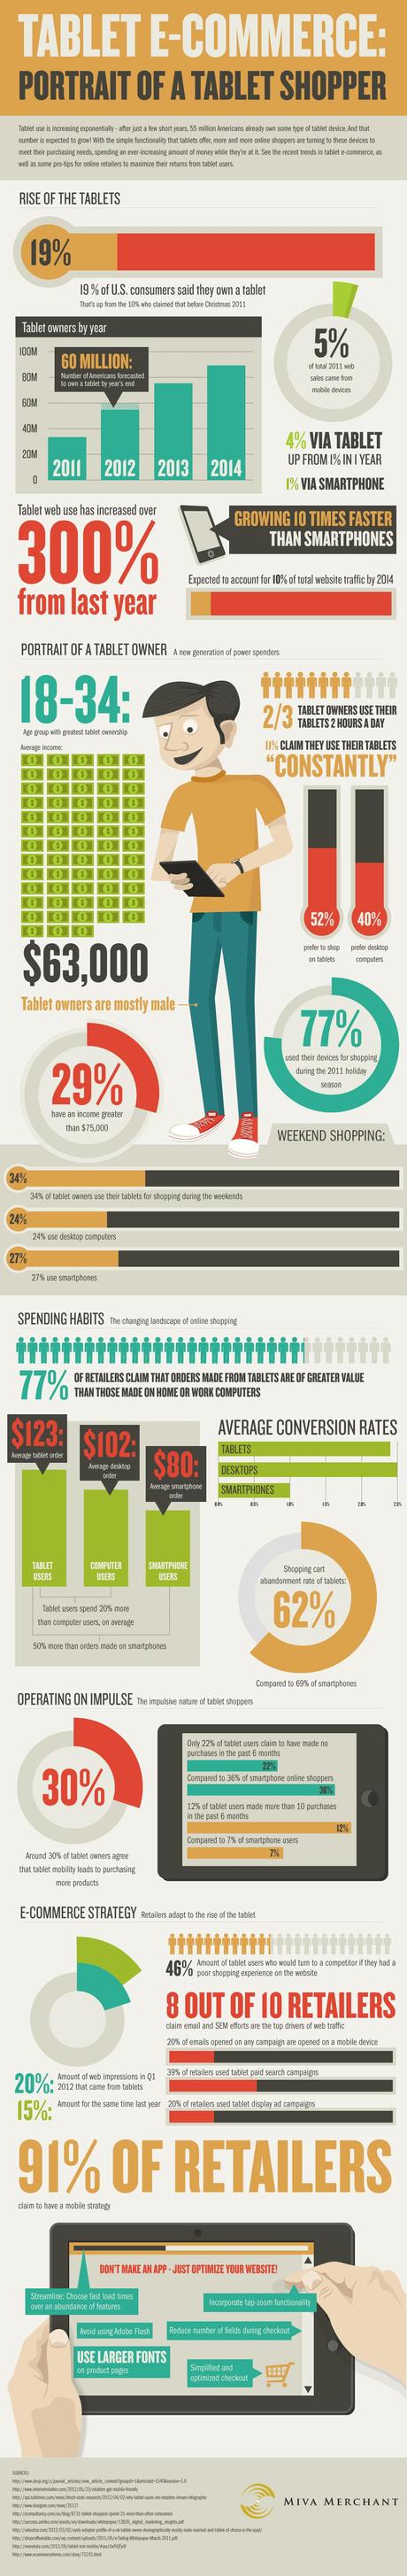 Infographic on the Portrait of a Tablet Shopper